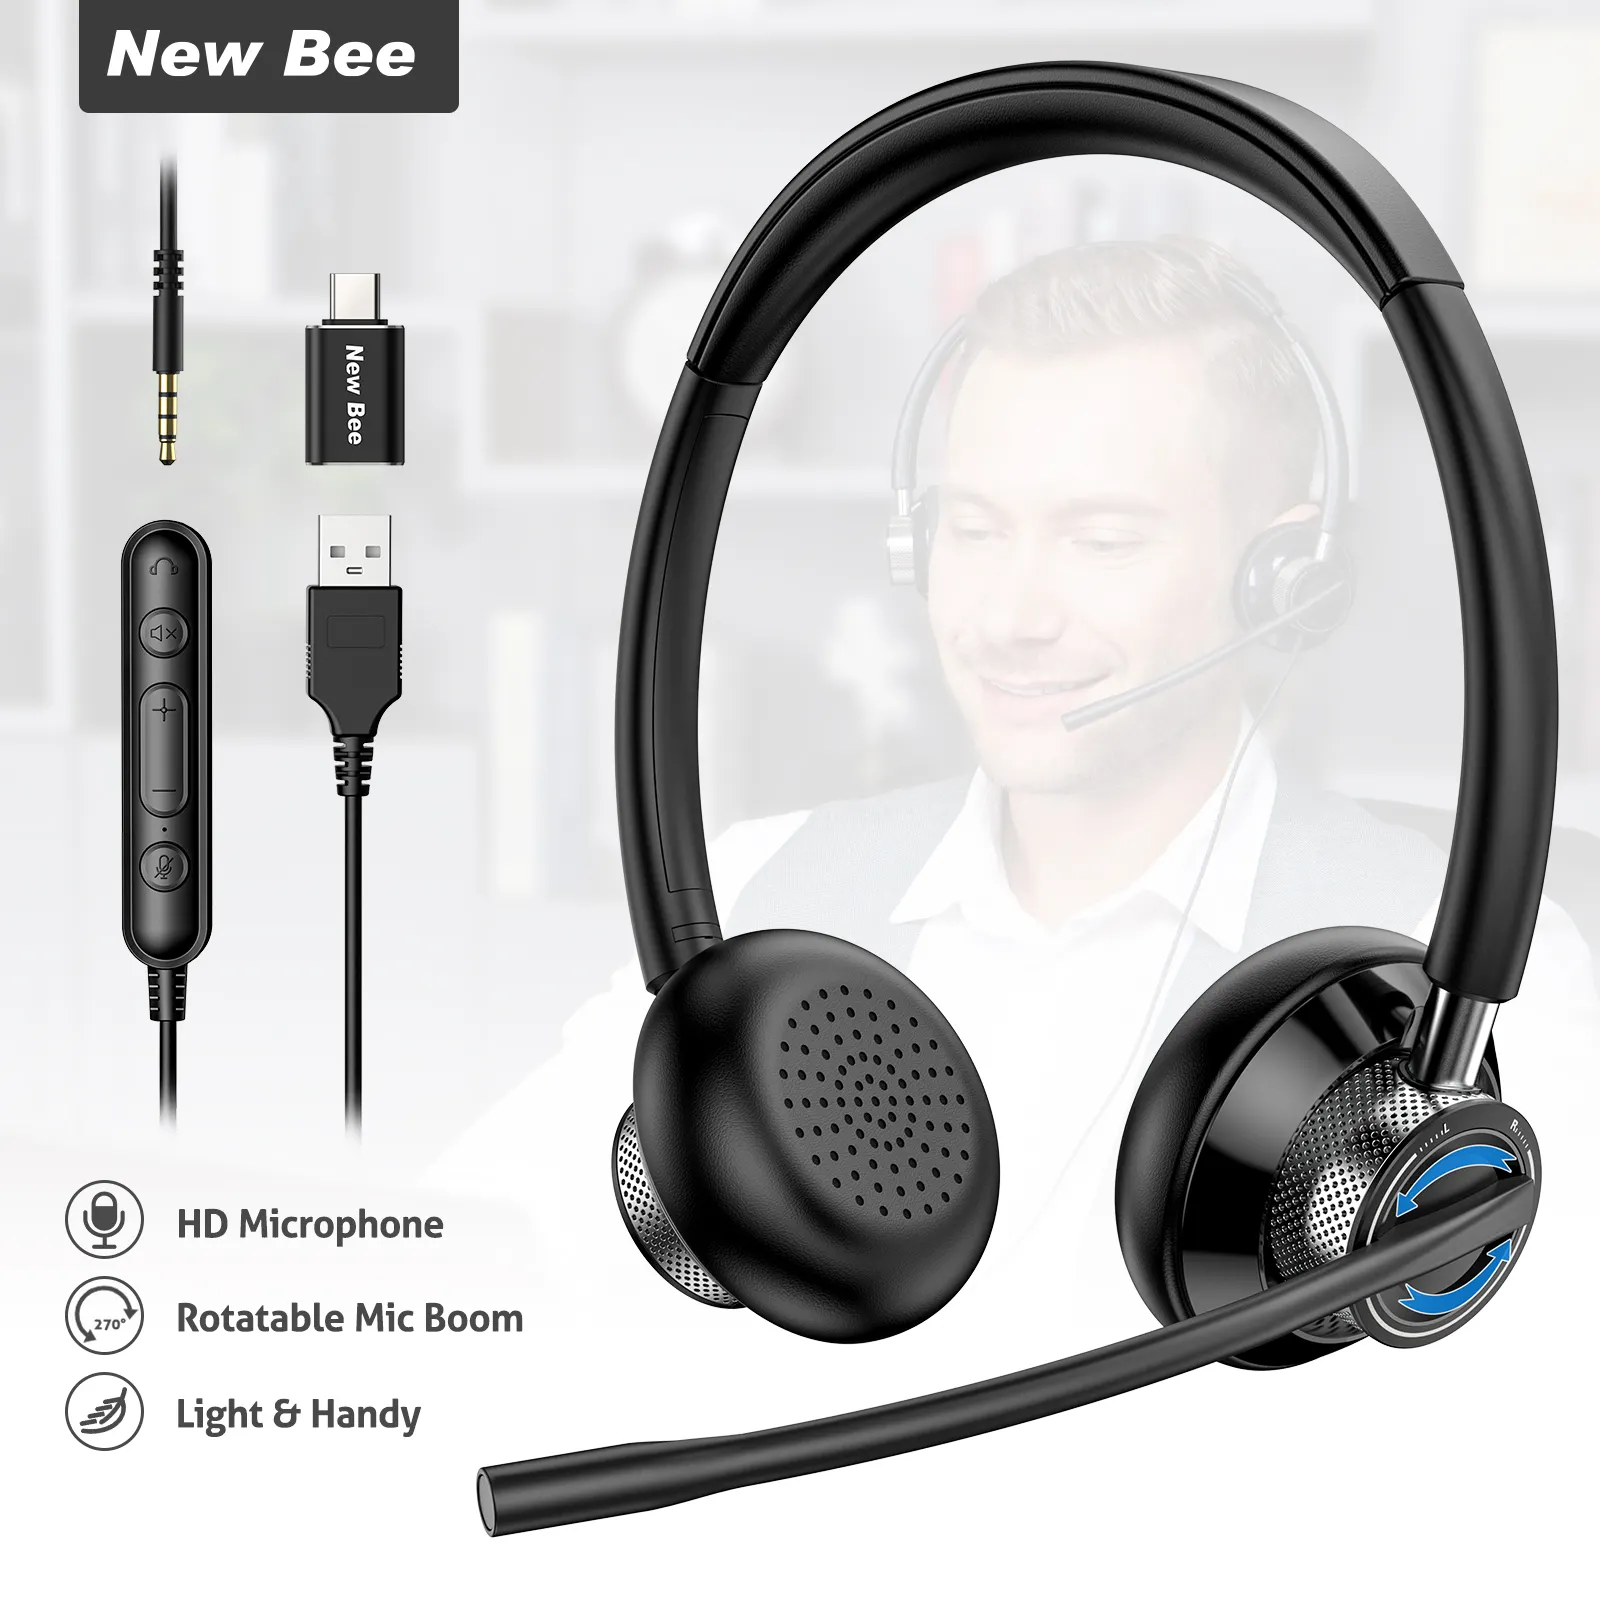 New Bee On-Ear USB Headset With Noise Cancelling Microphone Computer Head Phone Wired Earphones Wire Headphones For Laptop PC